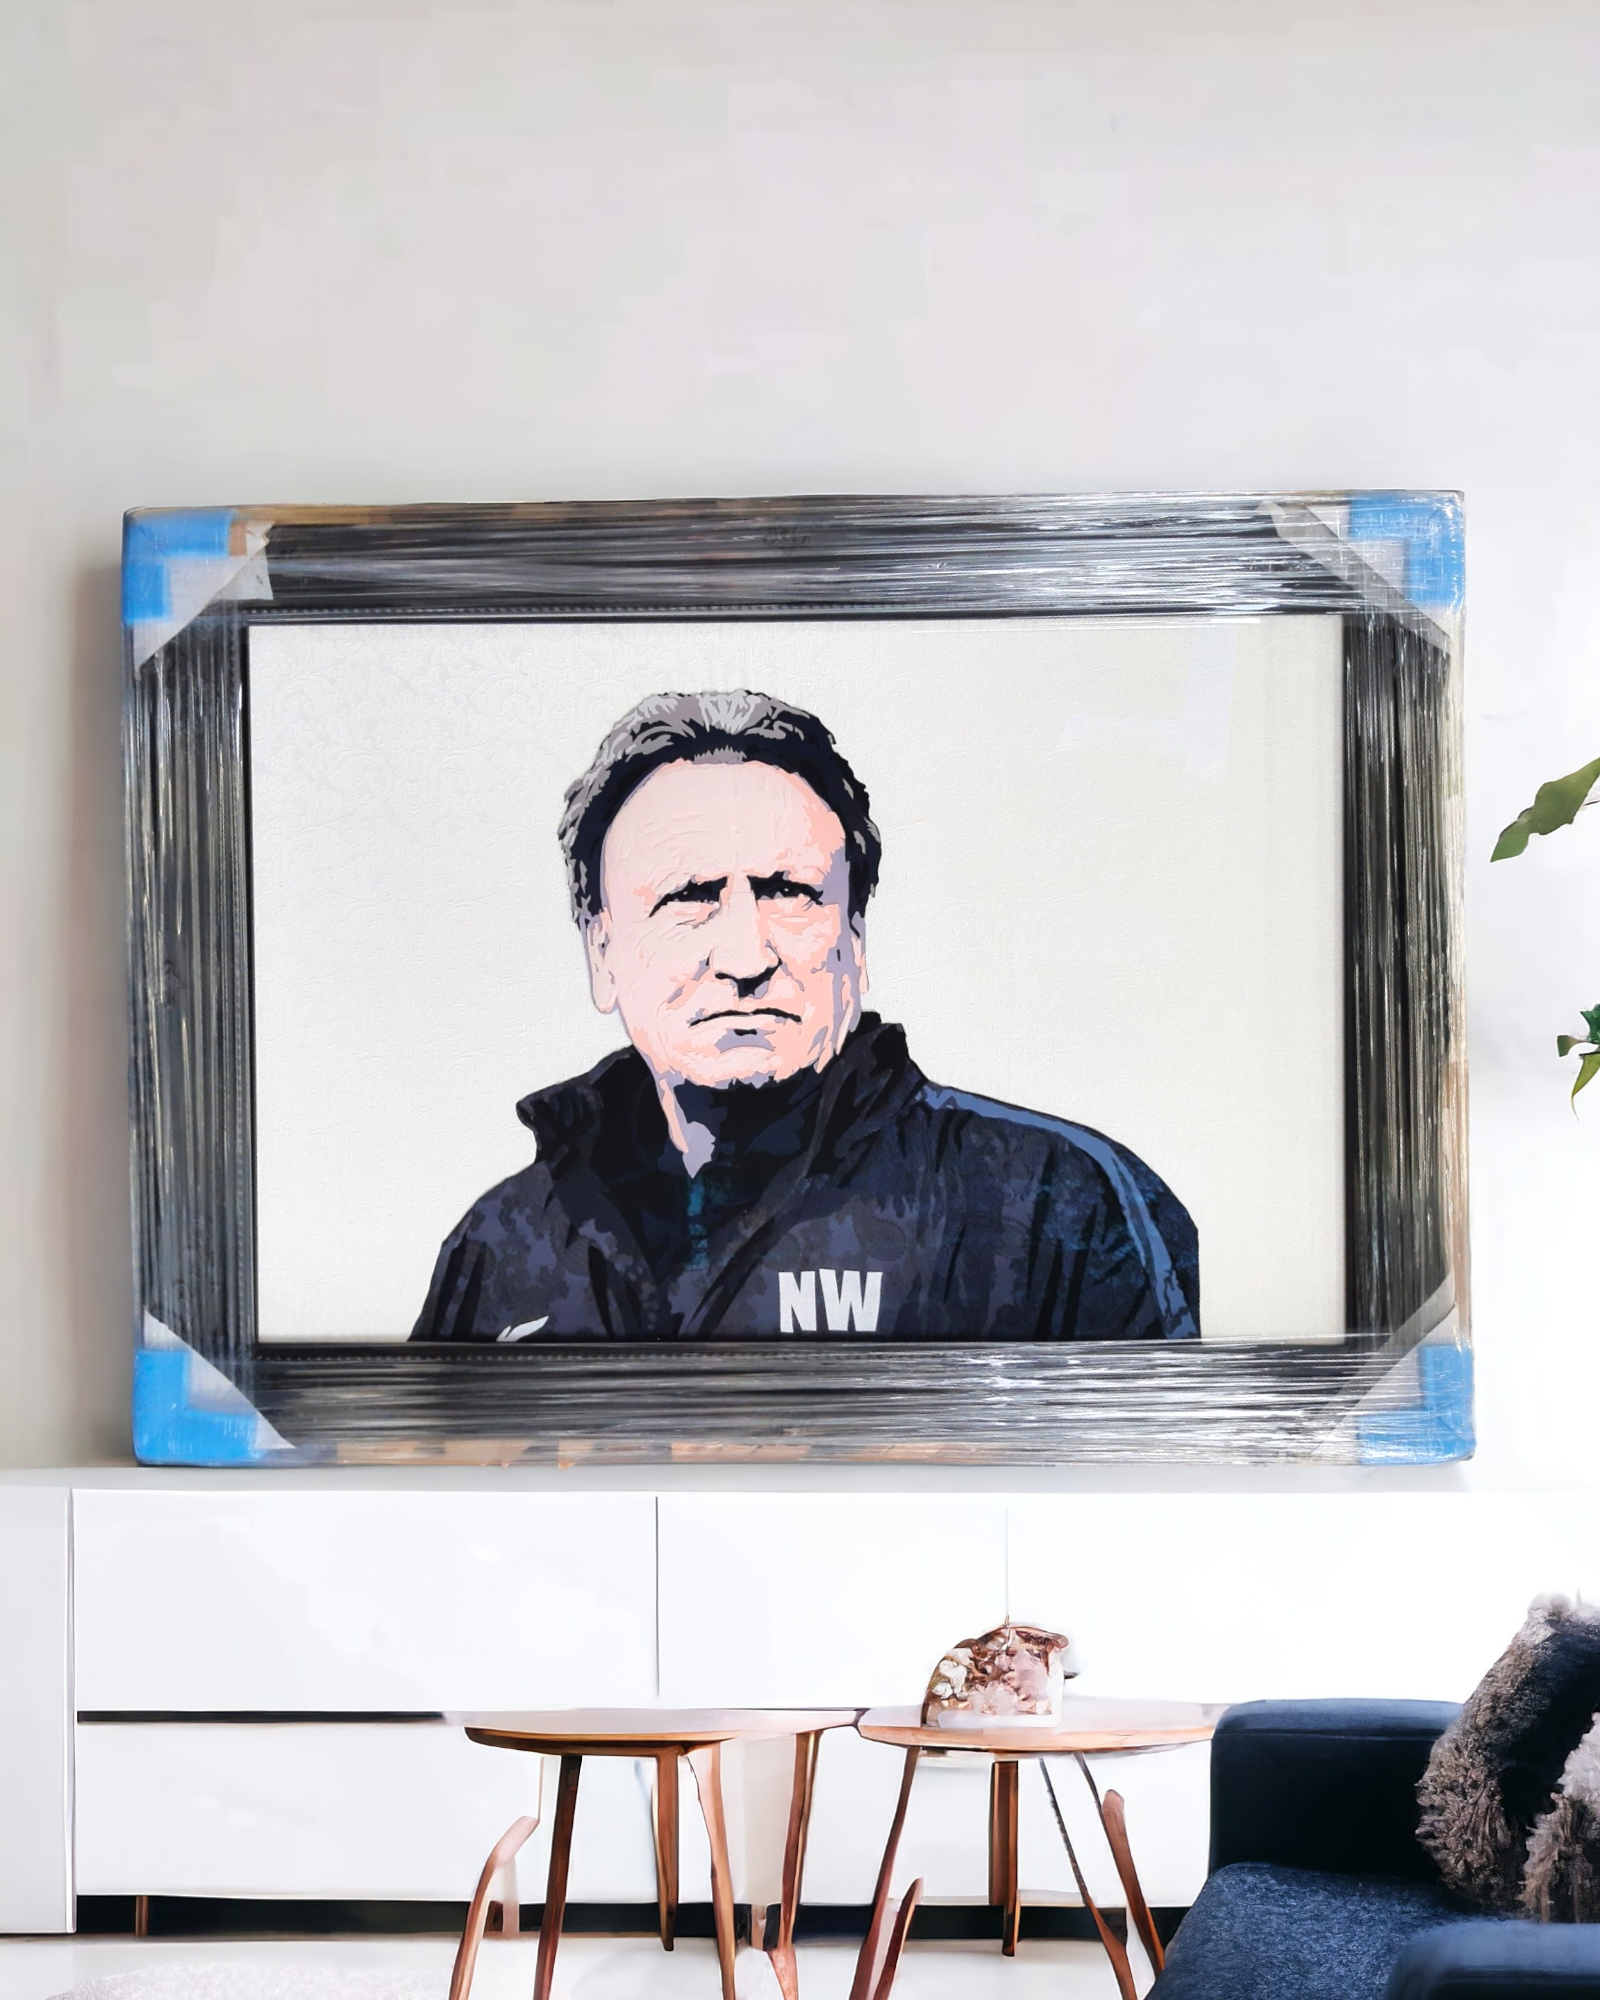 Applique fabric art peice of football manager Neil Warnock in a black Swept framed. White livingroom decor in the background.